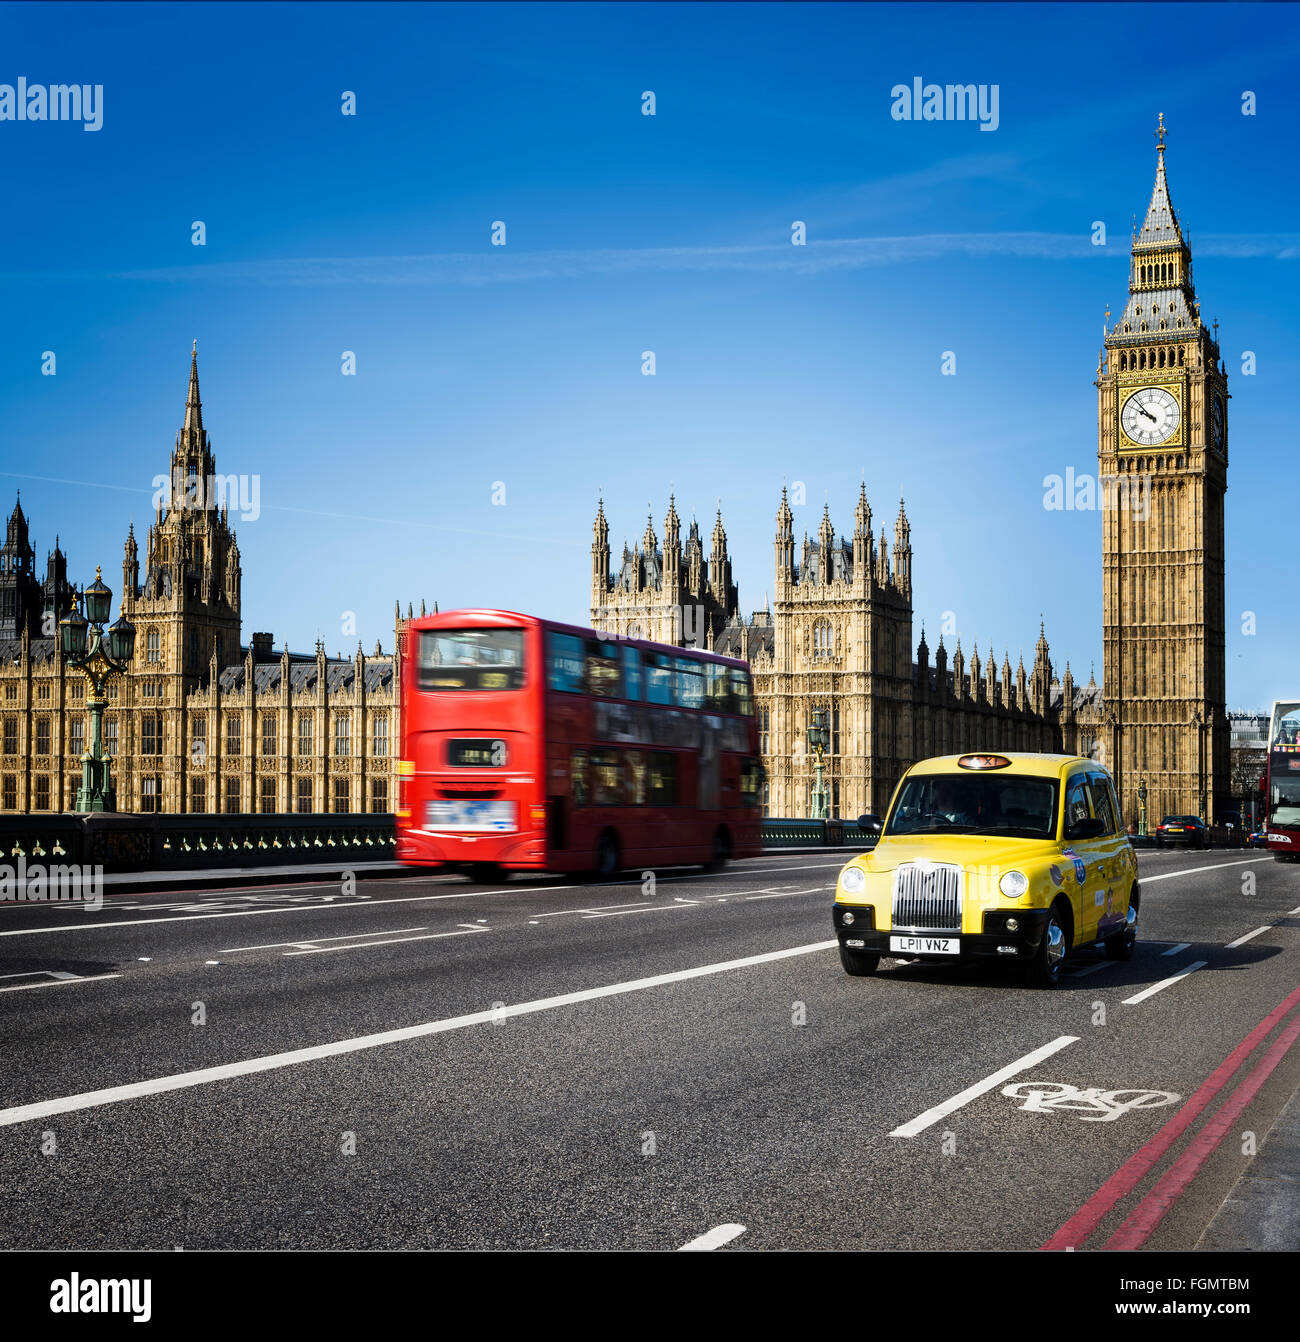 LONDON - APRIL 12, 2015 : London Bus and traditional taxi with Big Ben on April 12, 2015 in London, England. Stock Photo